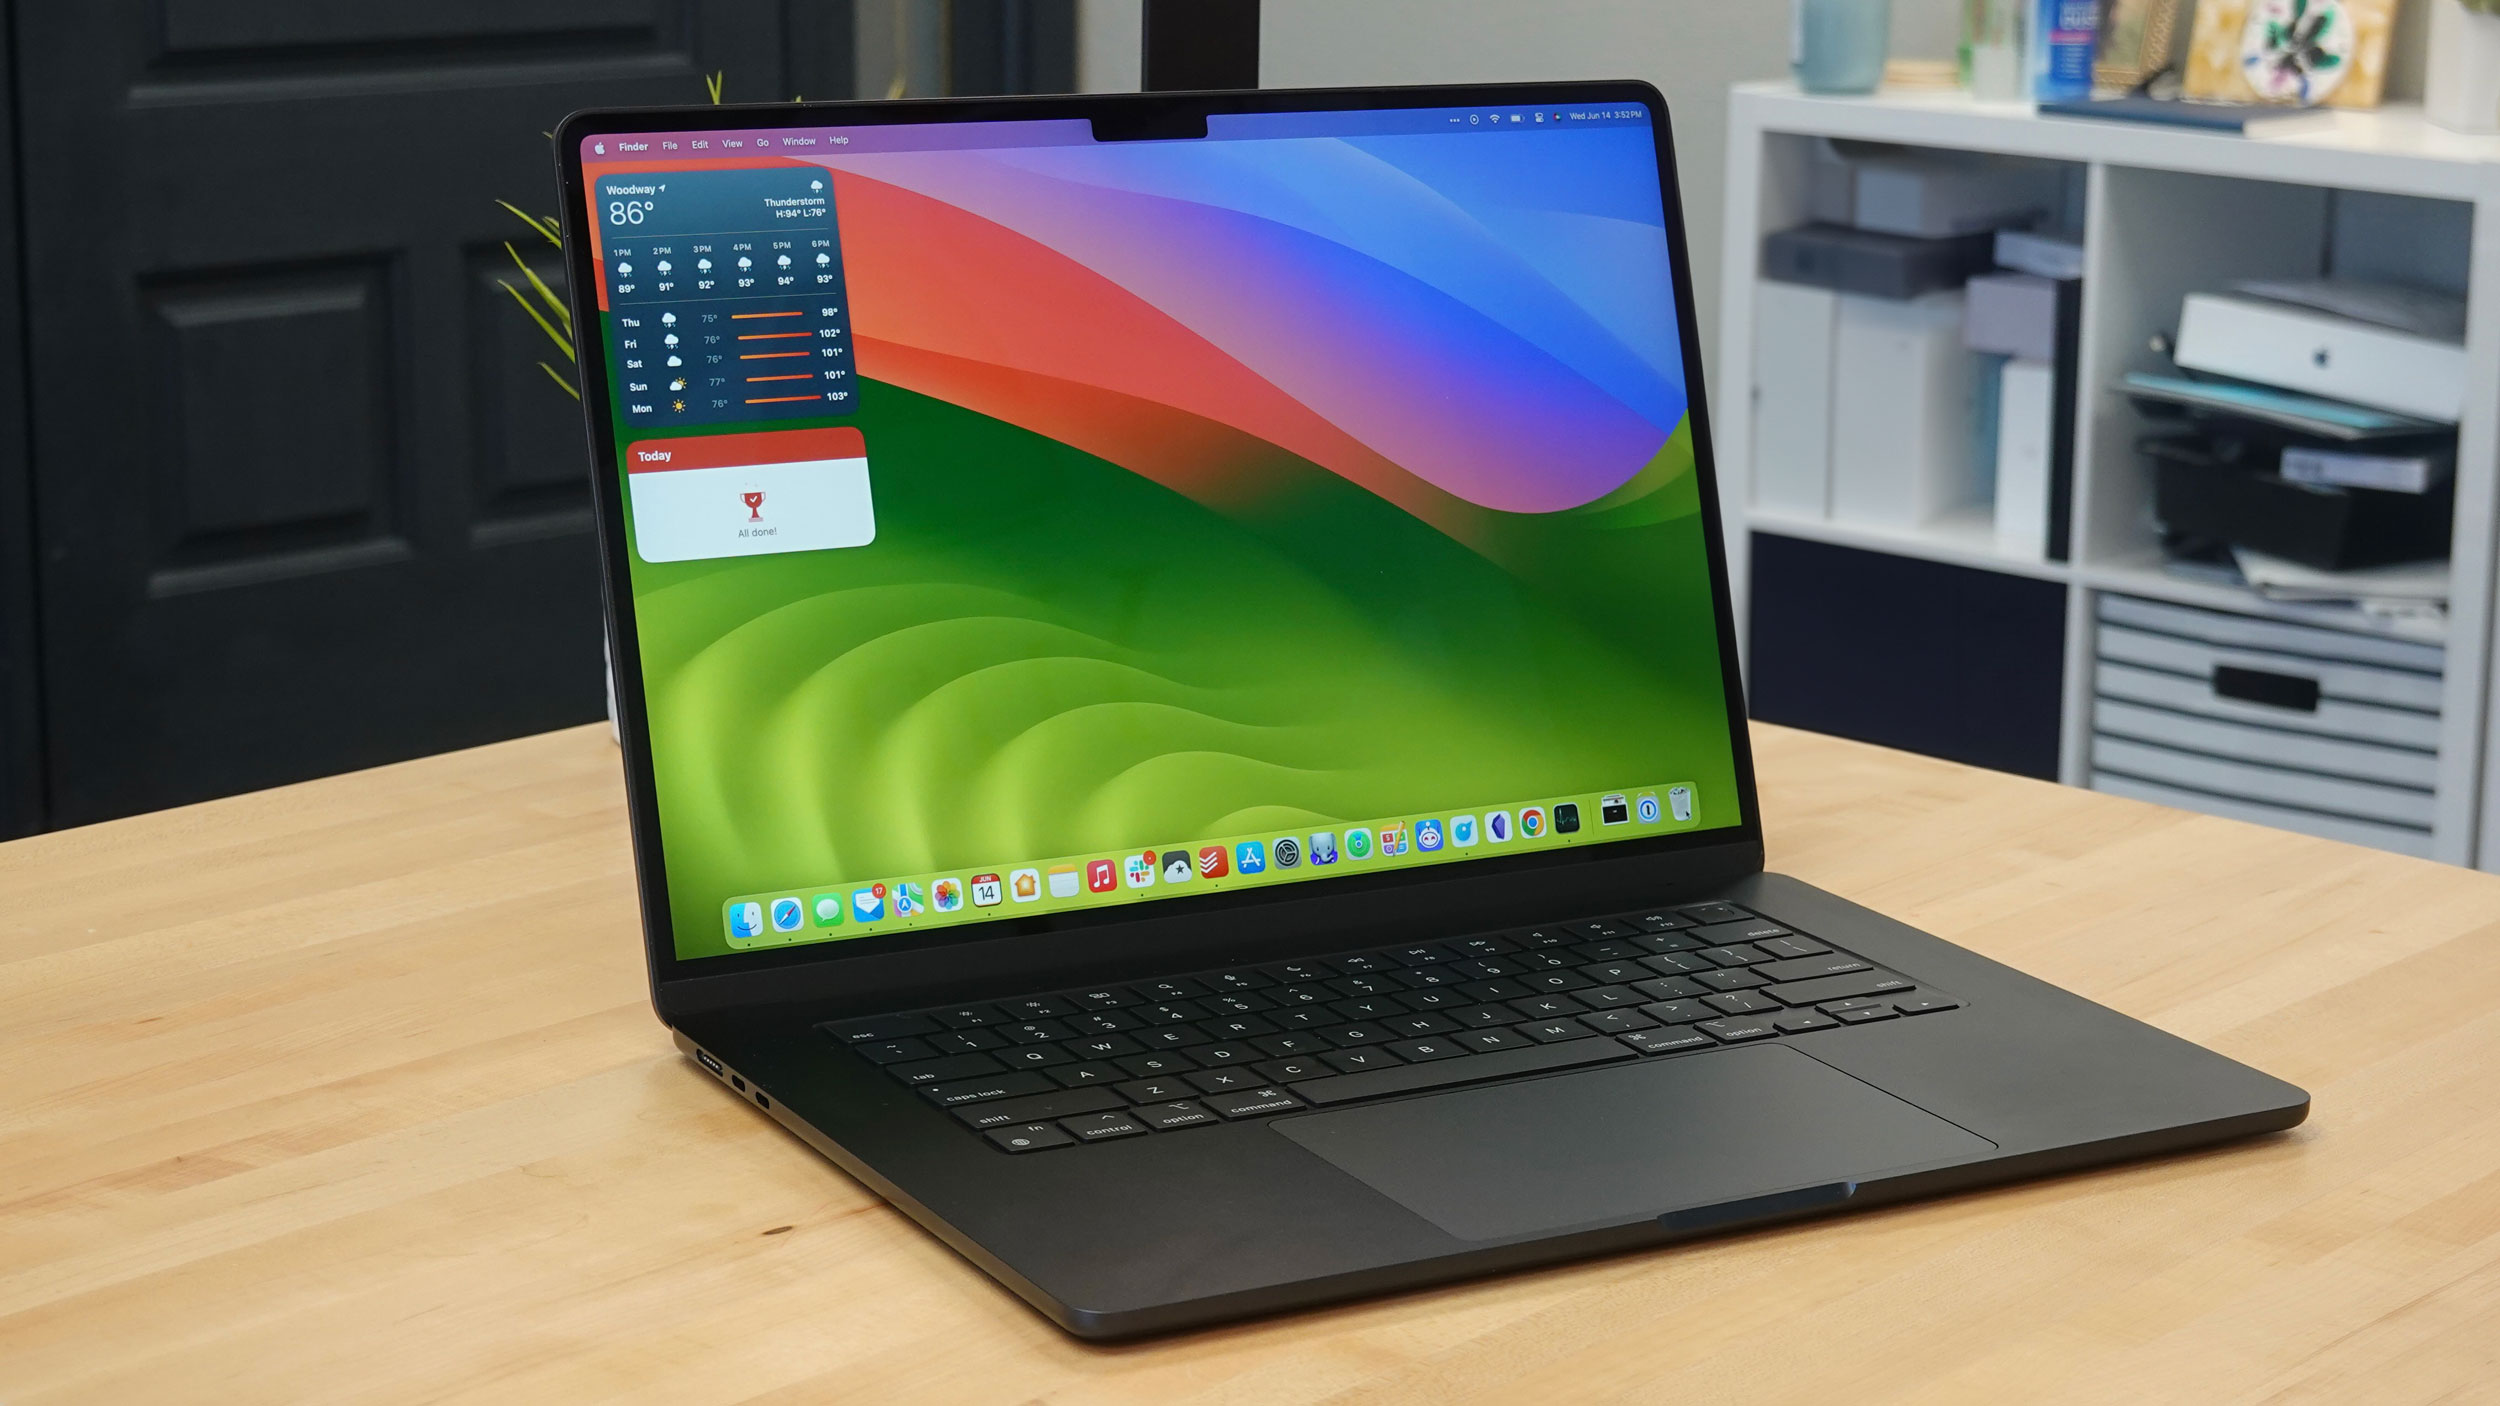 Hands-on with the new 15-inch MacBook Air [Gallery] - 9to5Mac